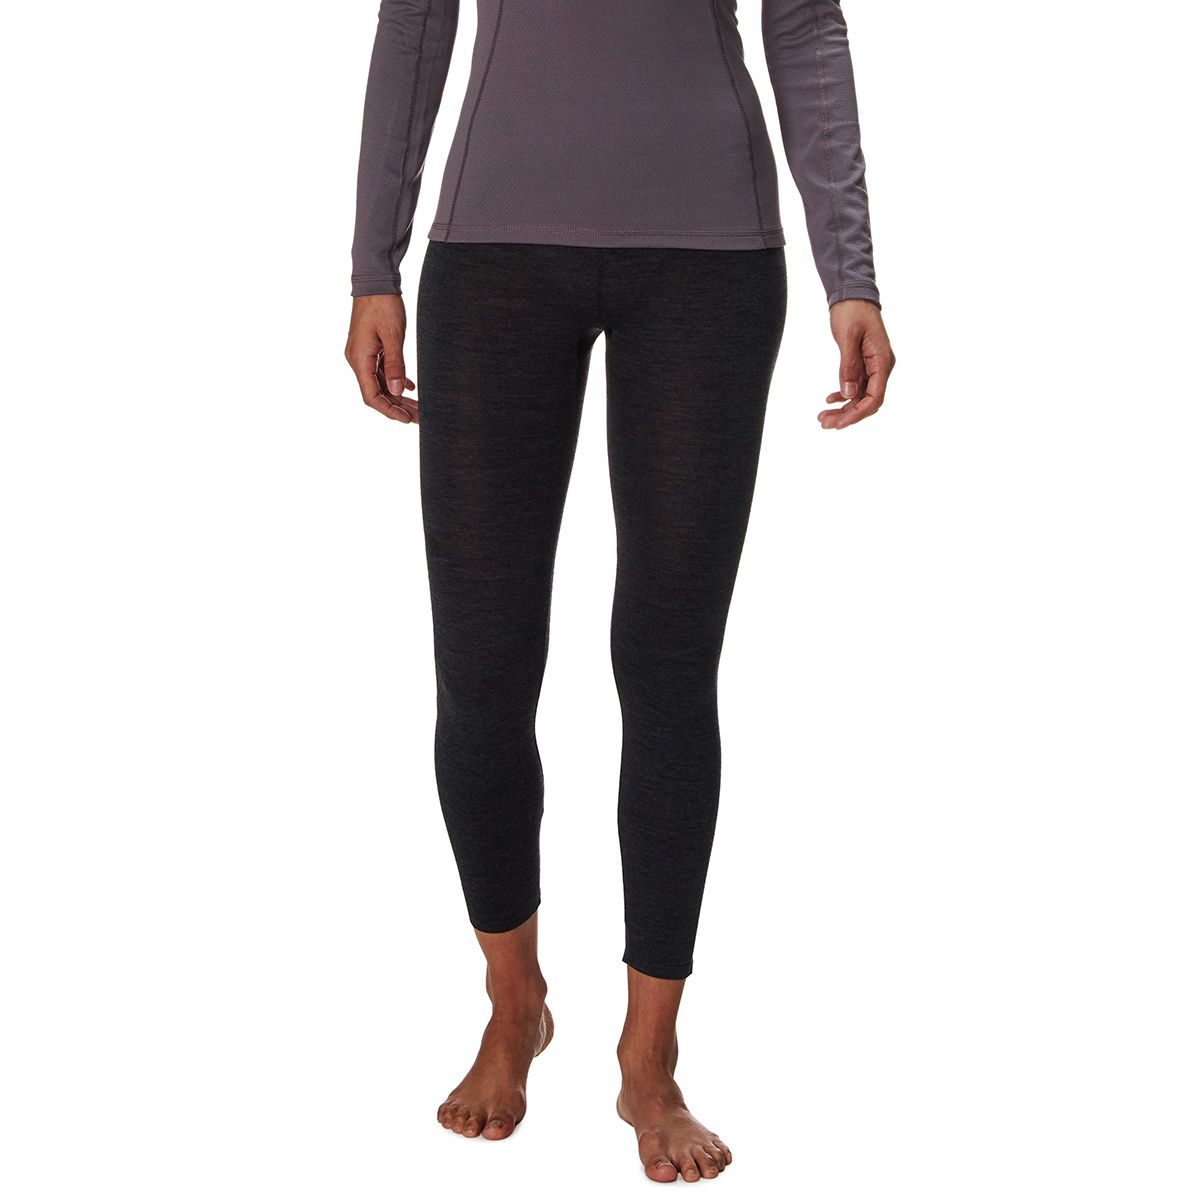 north face wool base layer